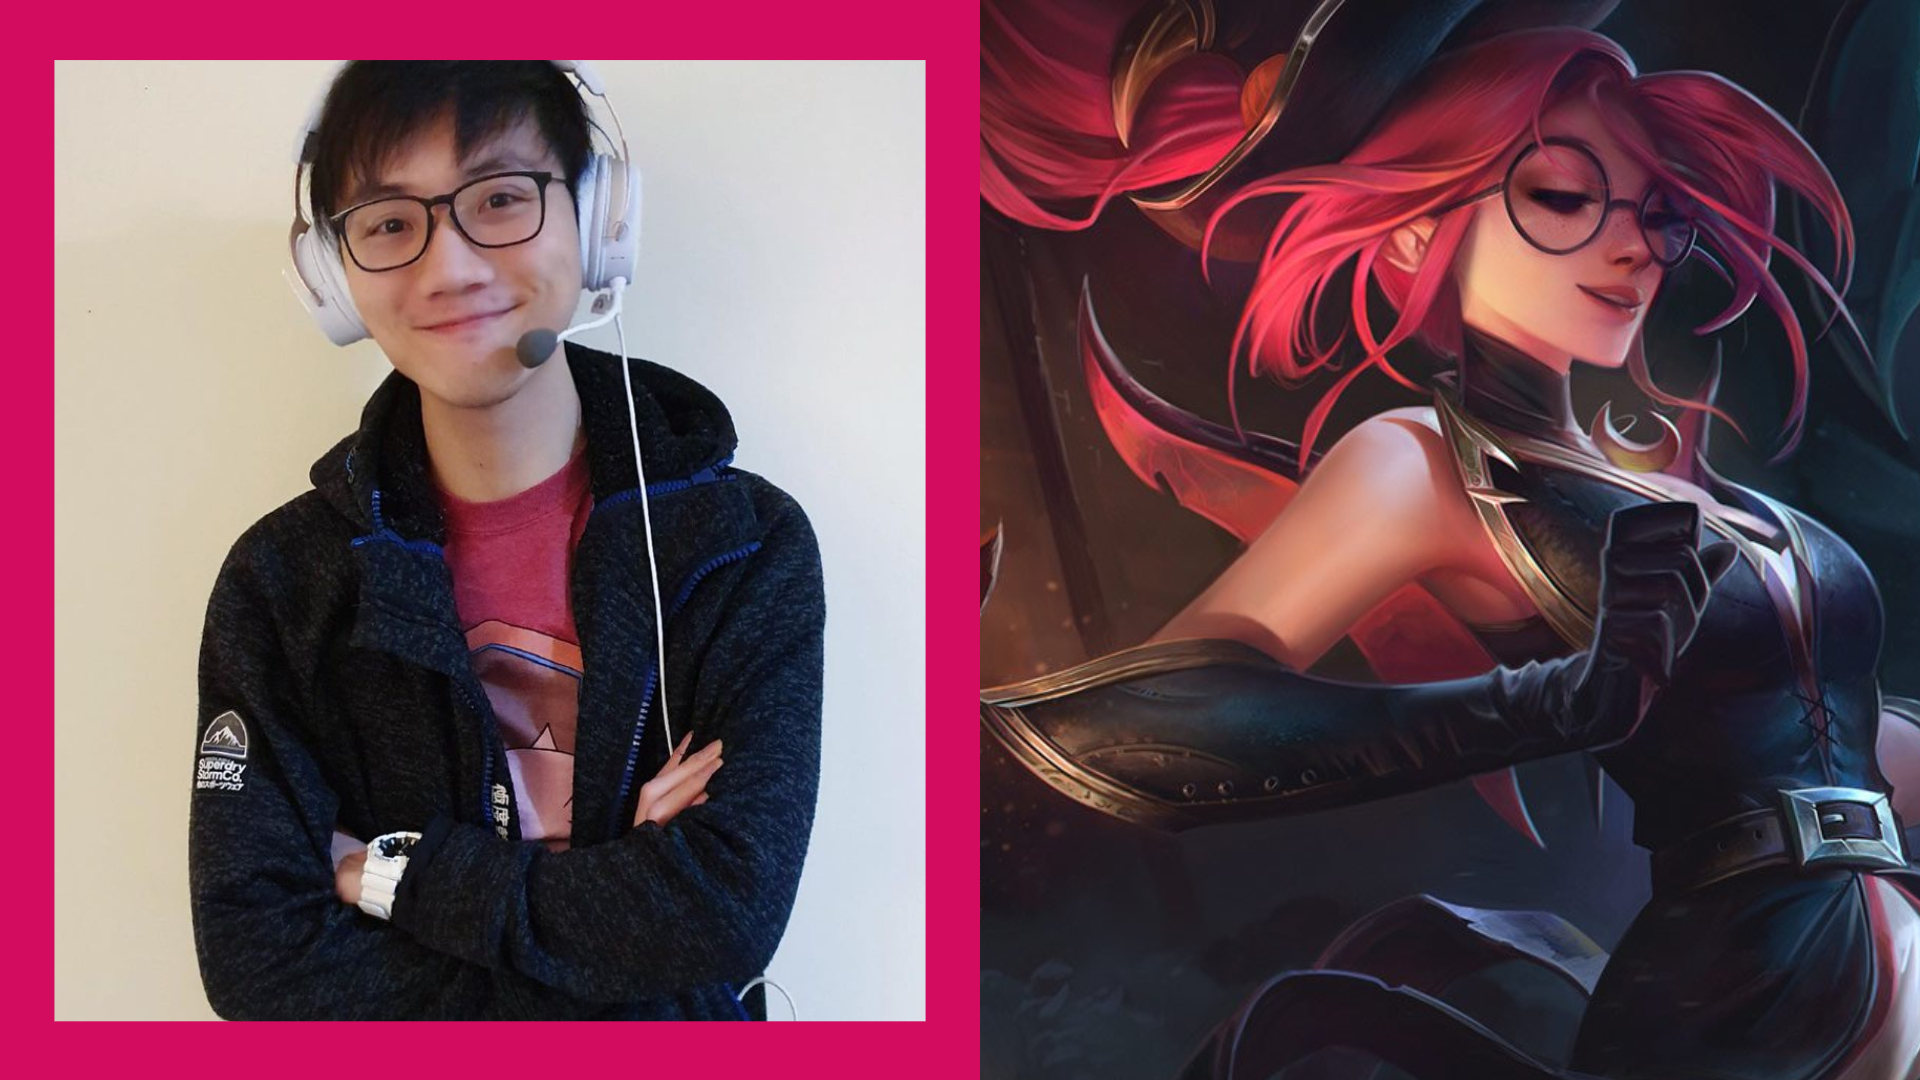 BoxBox programs AI to support him in League of Legends via voice commands